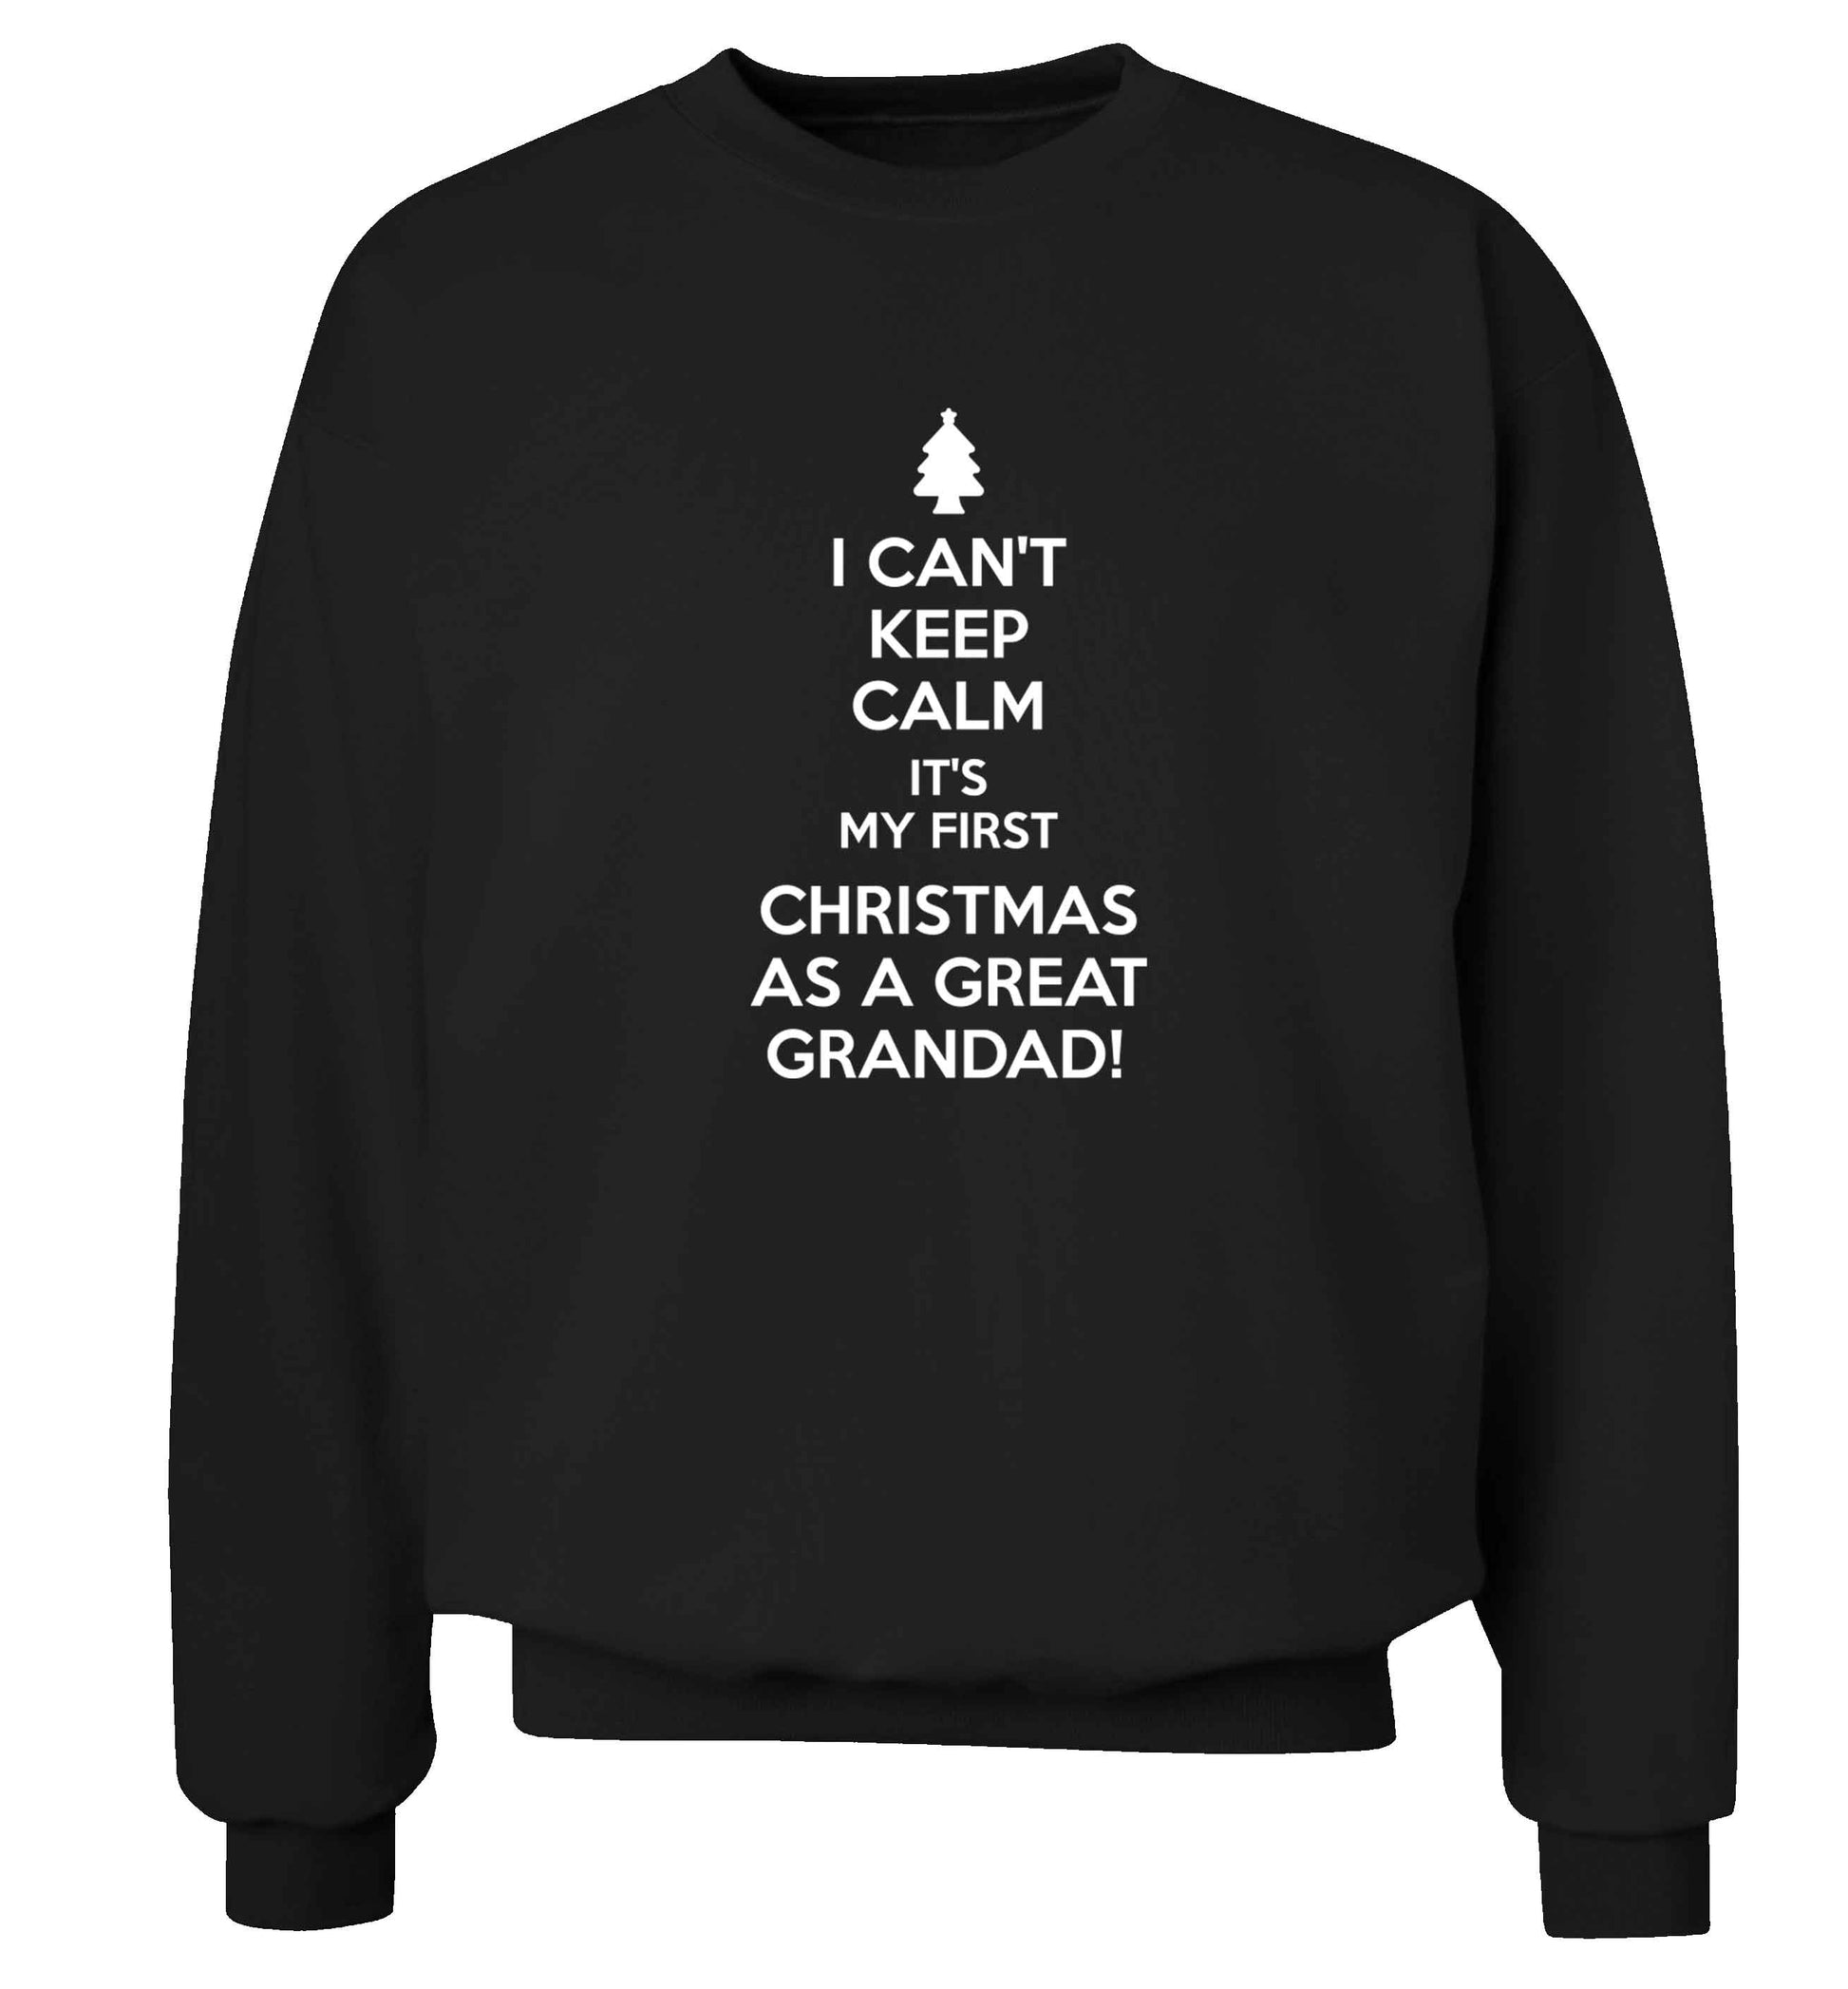 I can't keep calm it's my first Christmas as a great grandad! Adult's unisex black Sweater 2XL